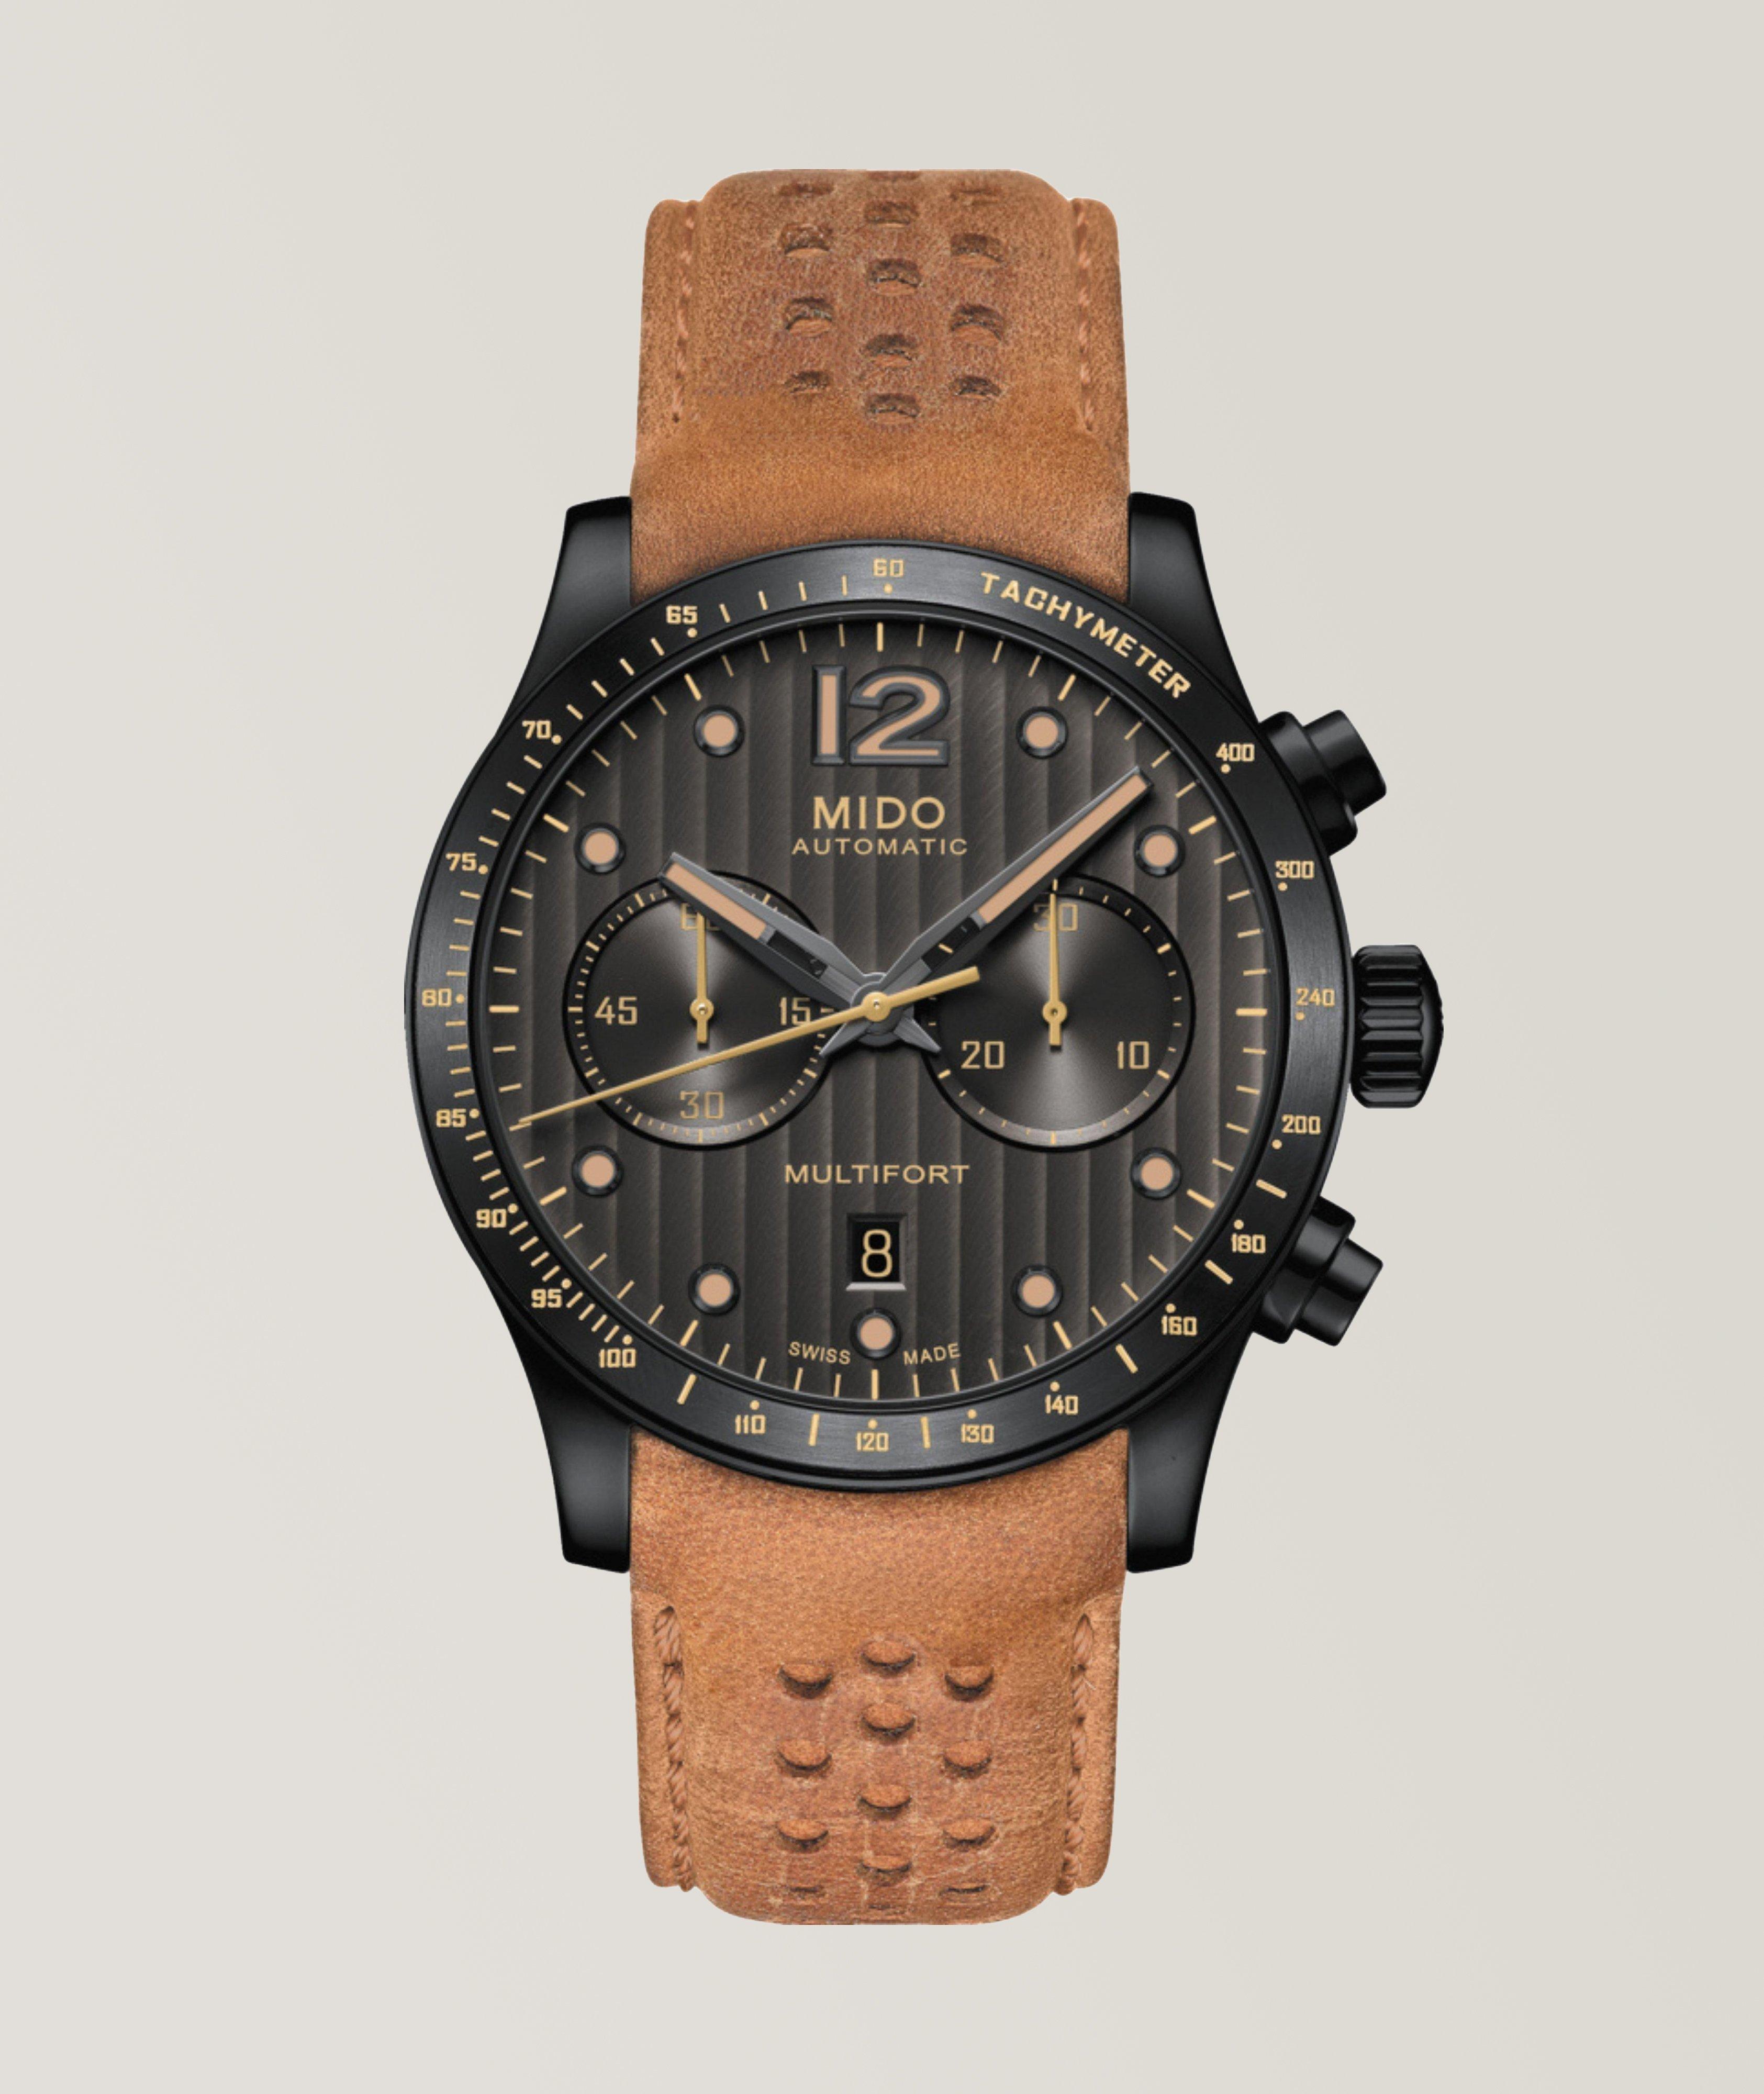 Montre-chronographe, collection Multifort image 0